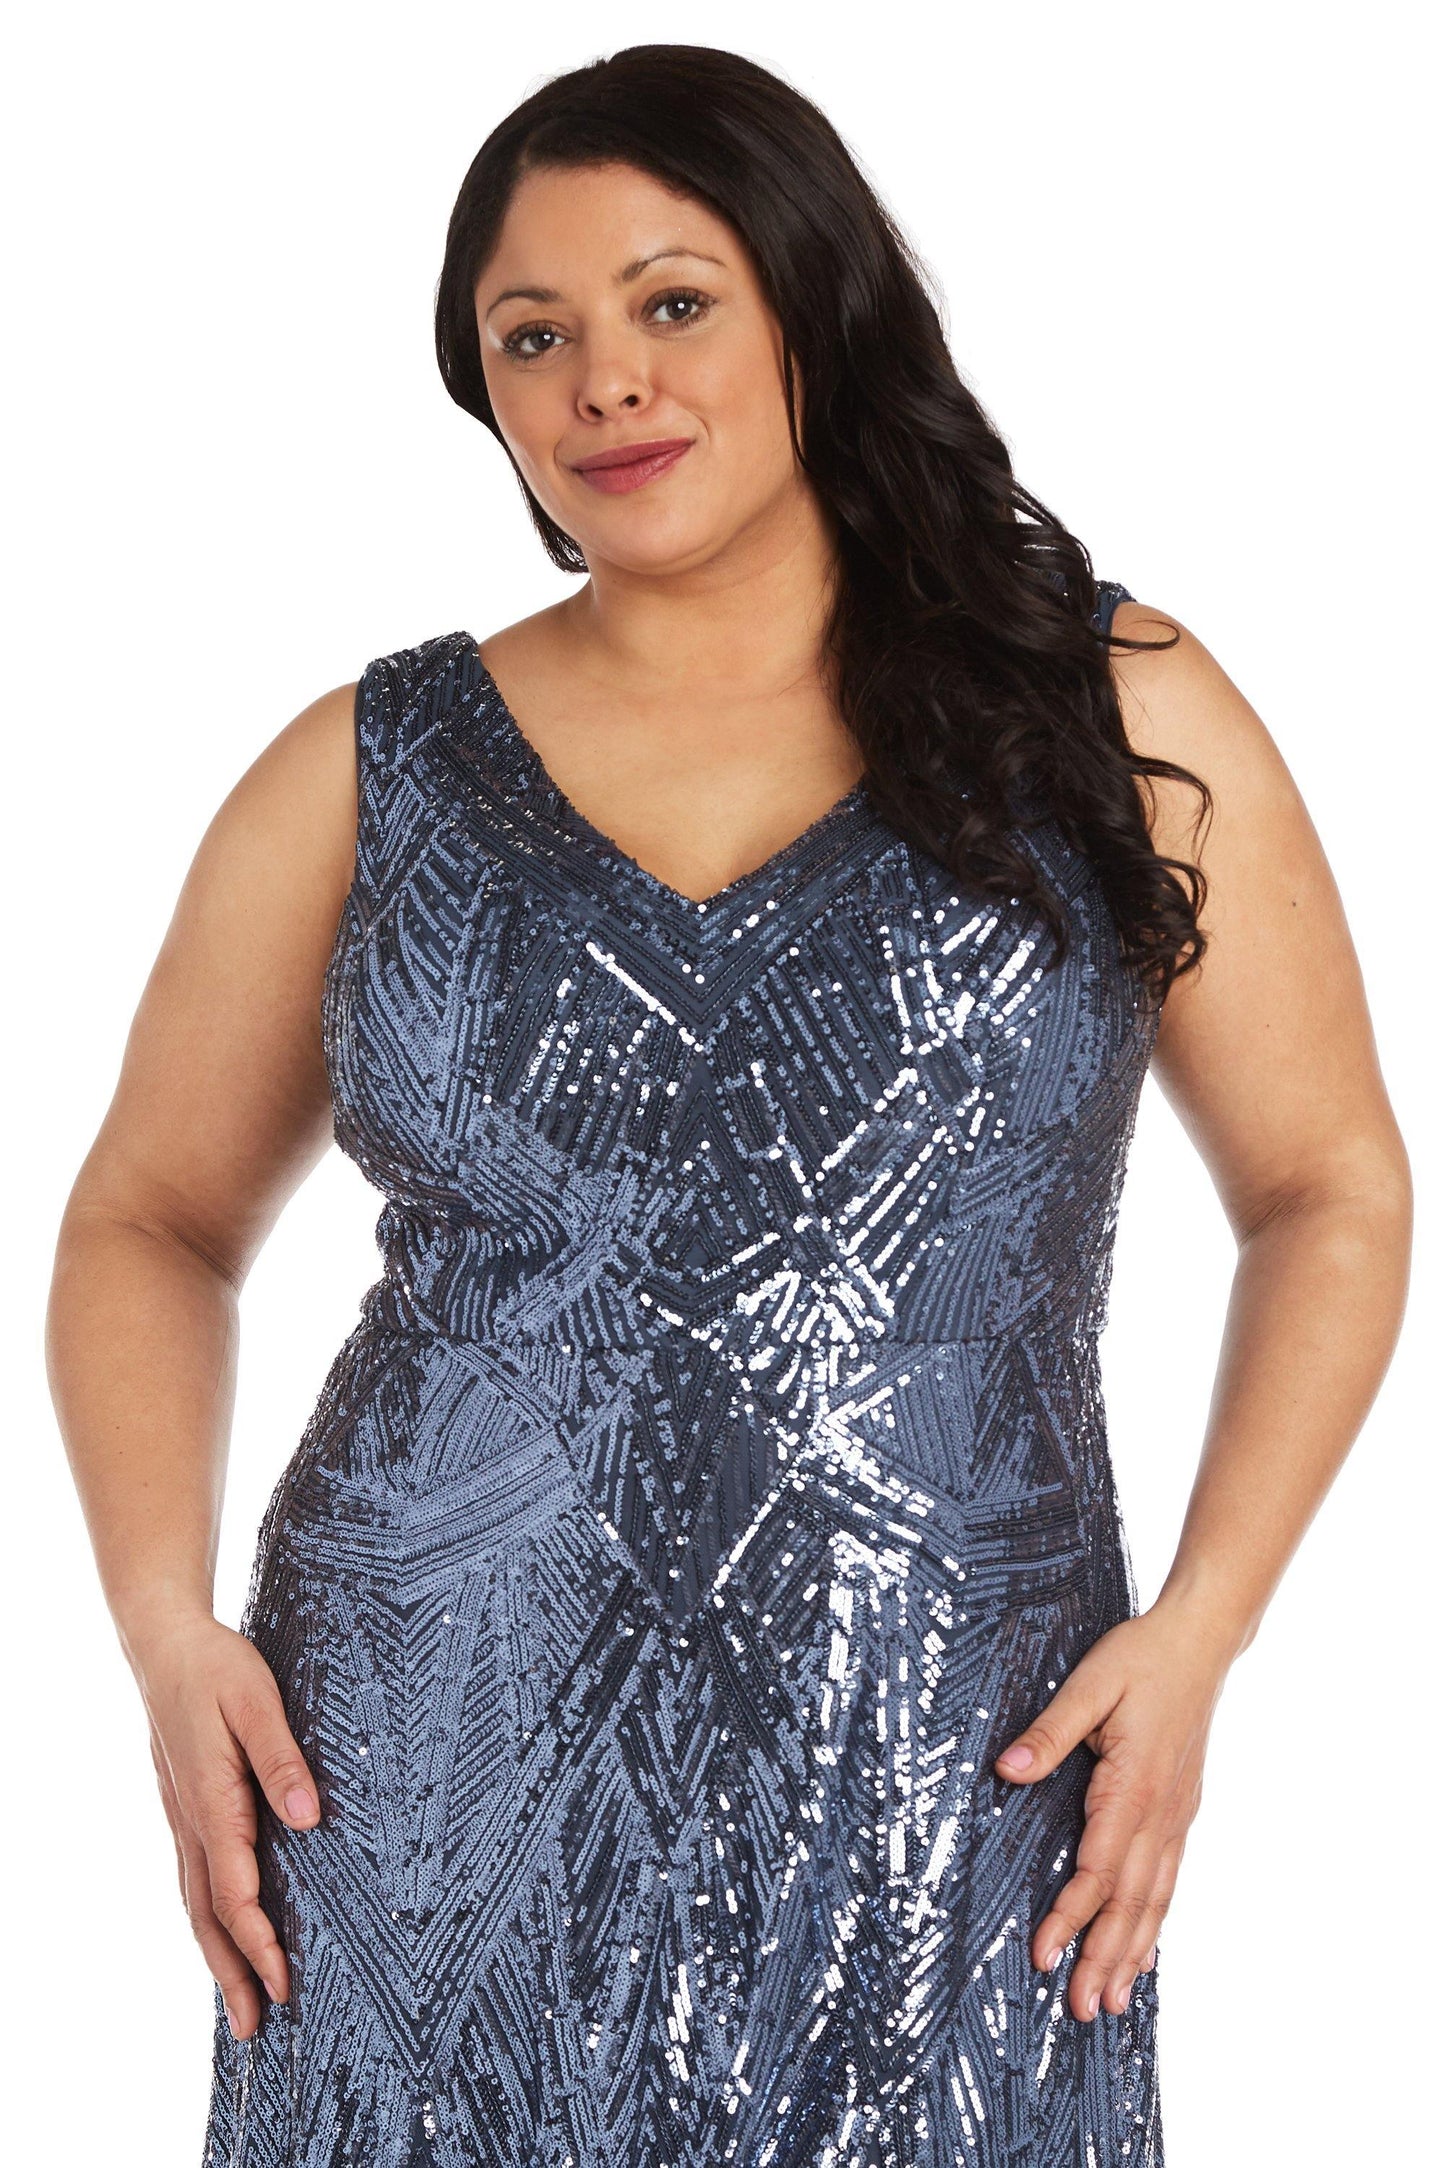 Nightway Long Plus Size Sleeveless Dress 22013W - The Dress Outlet